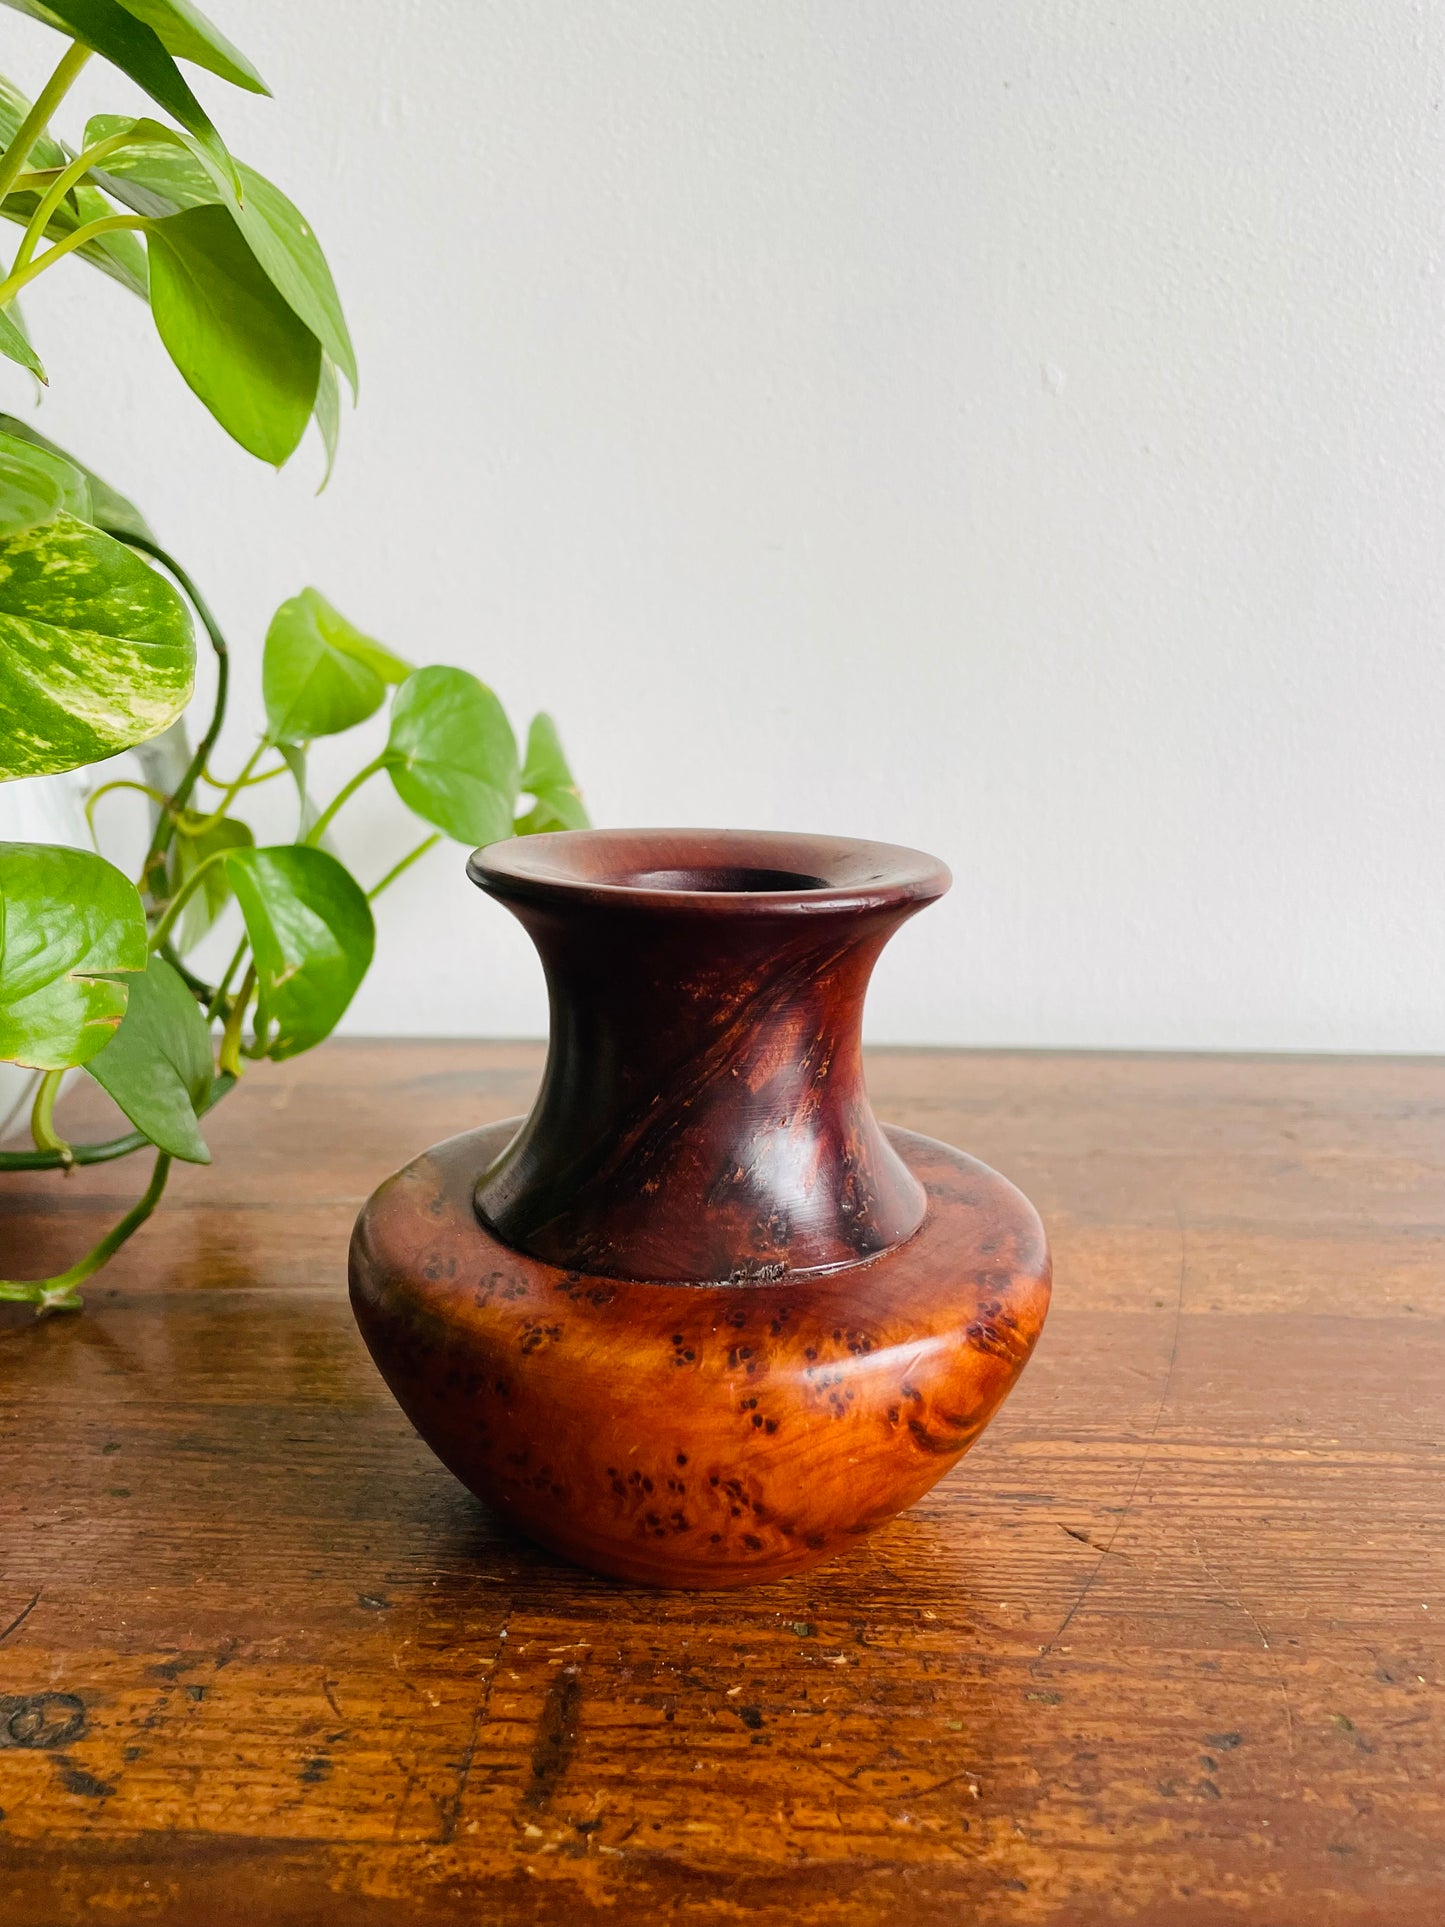 Beautiful Solid & Smooth Hand Turned Wood Vase with Drainage Holes at Bottom